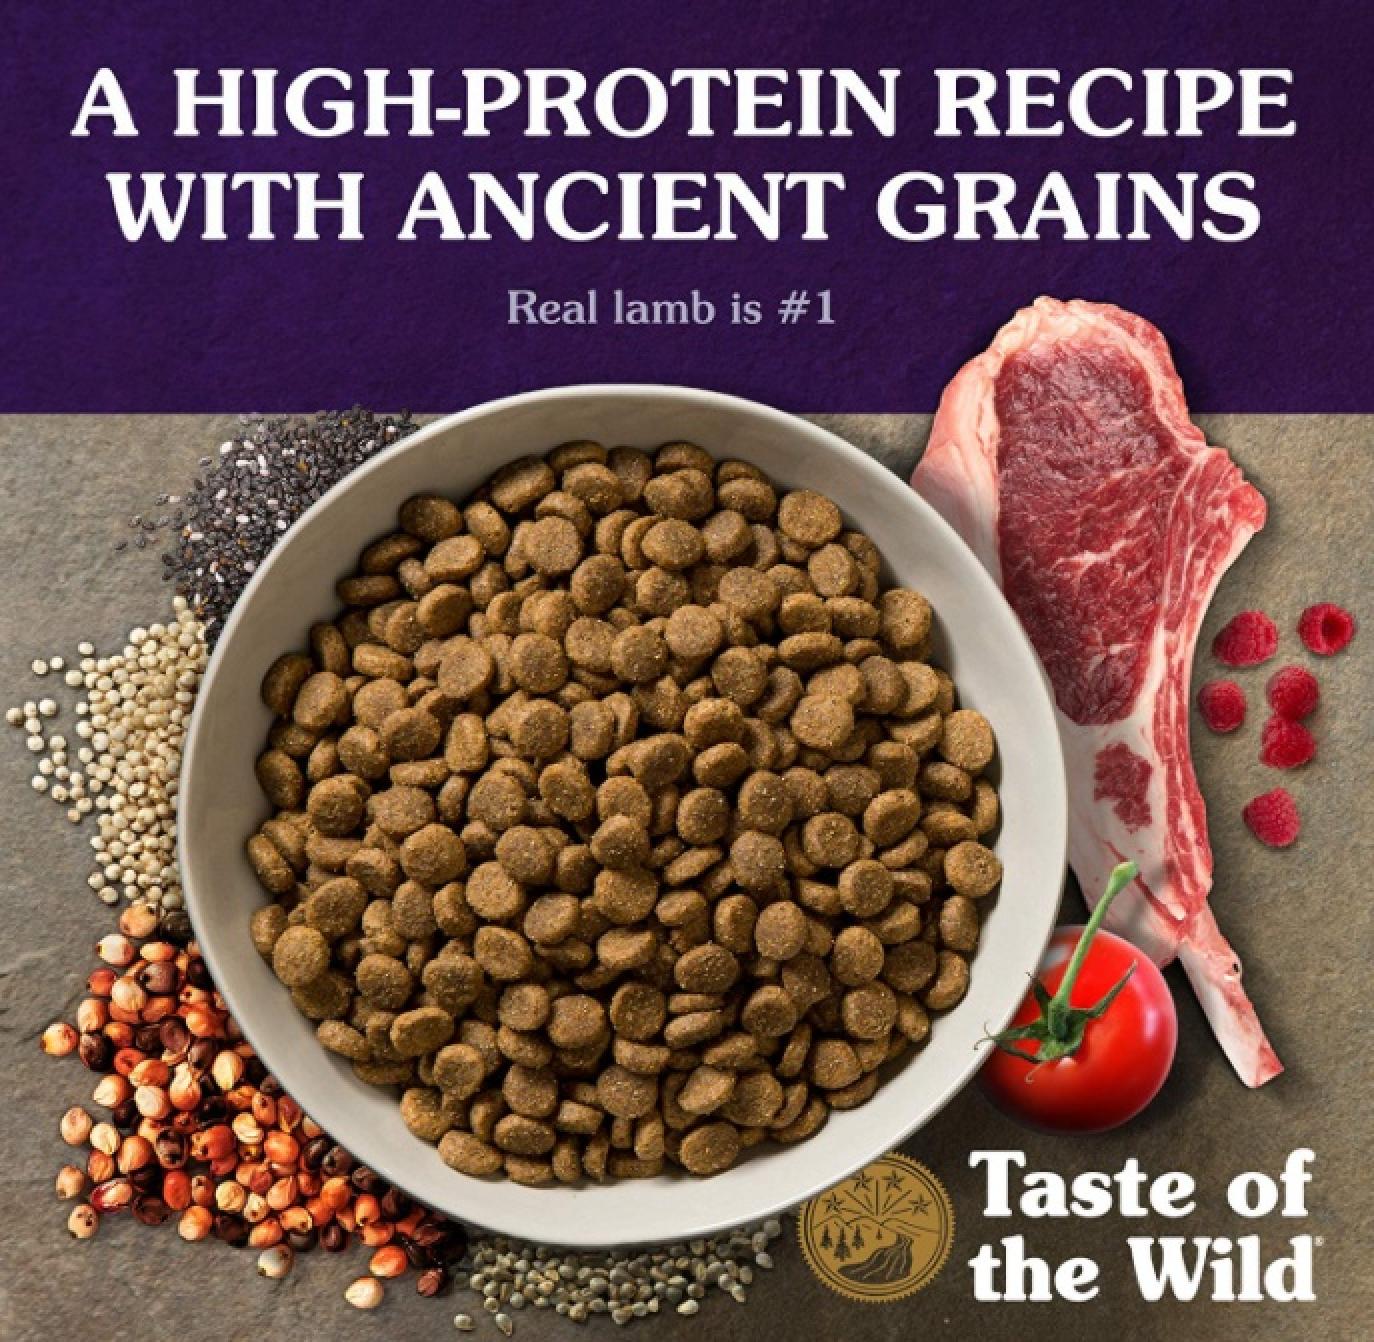 Taste of the Wild Ancient Mountain with Roasted Lamb and Ancient Grains